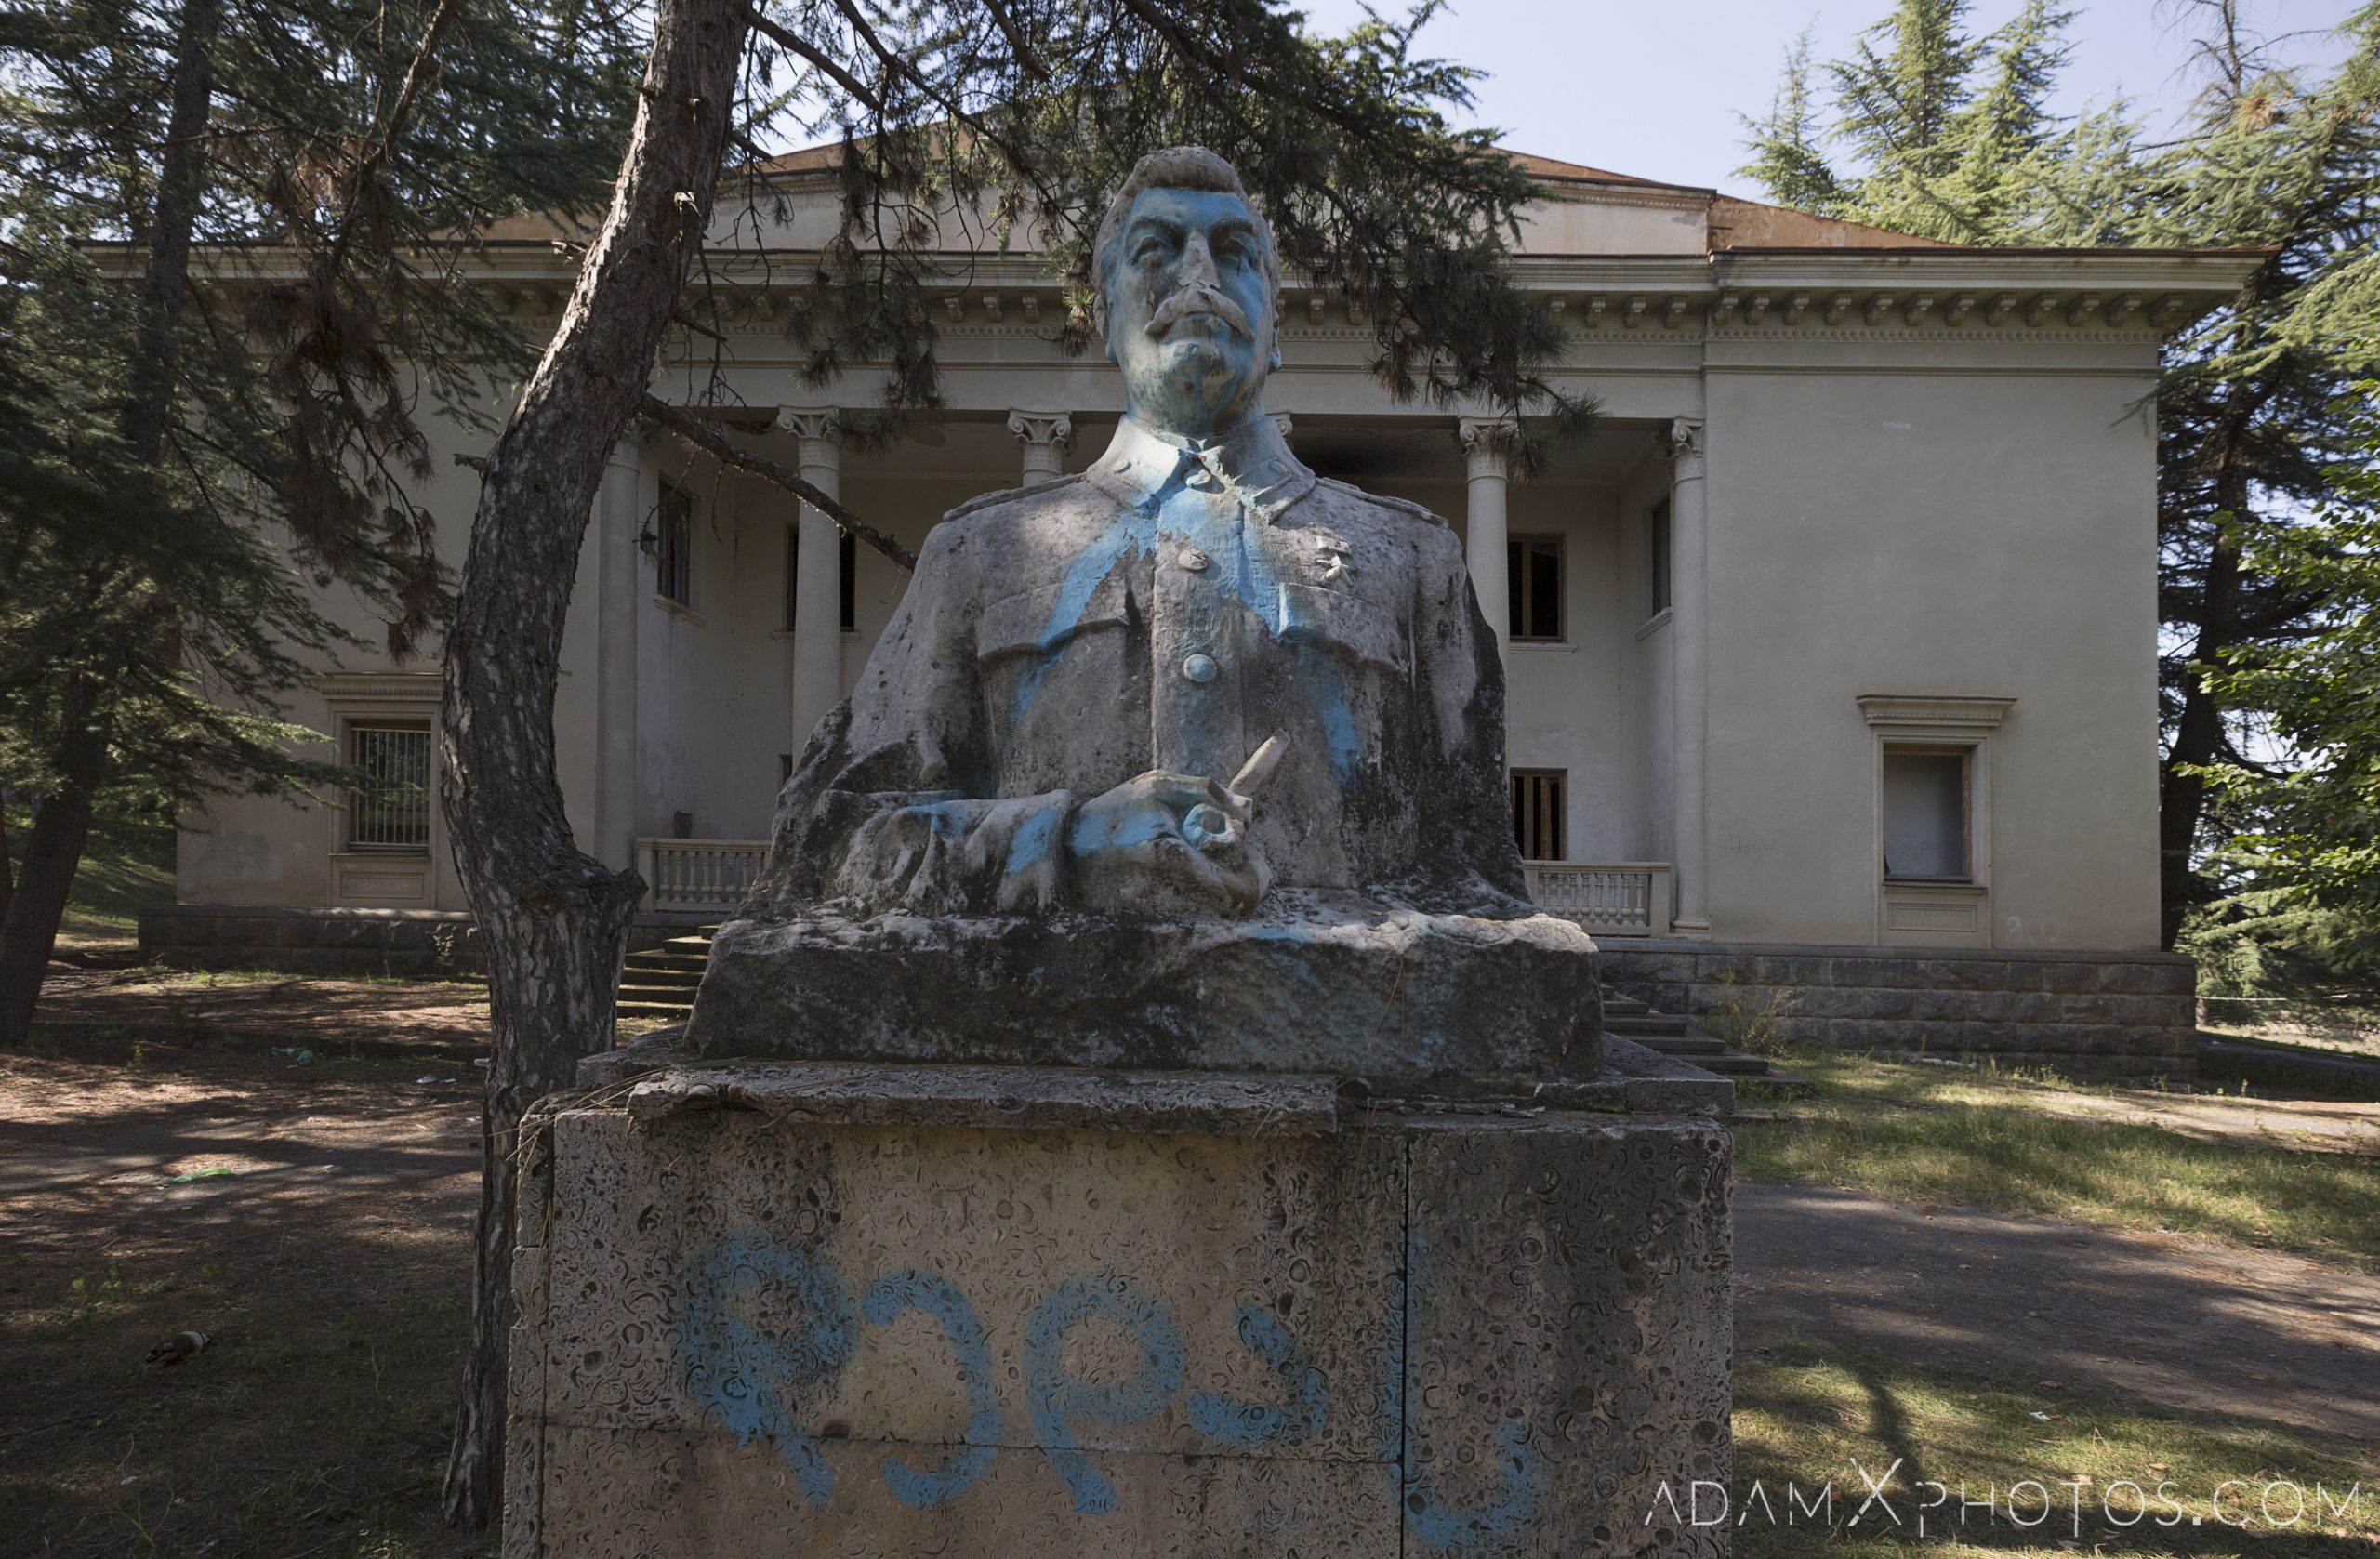 Stalin Front outside exterior external statue defaced House of Culture Palace Blue rural Soviet era Georgia Adam X AdamXPhotos Urbex Urban Exploration 2018 Abandoned Access History decay ruins lost forgotten derelict location creepy haunting eerie security